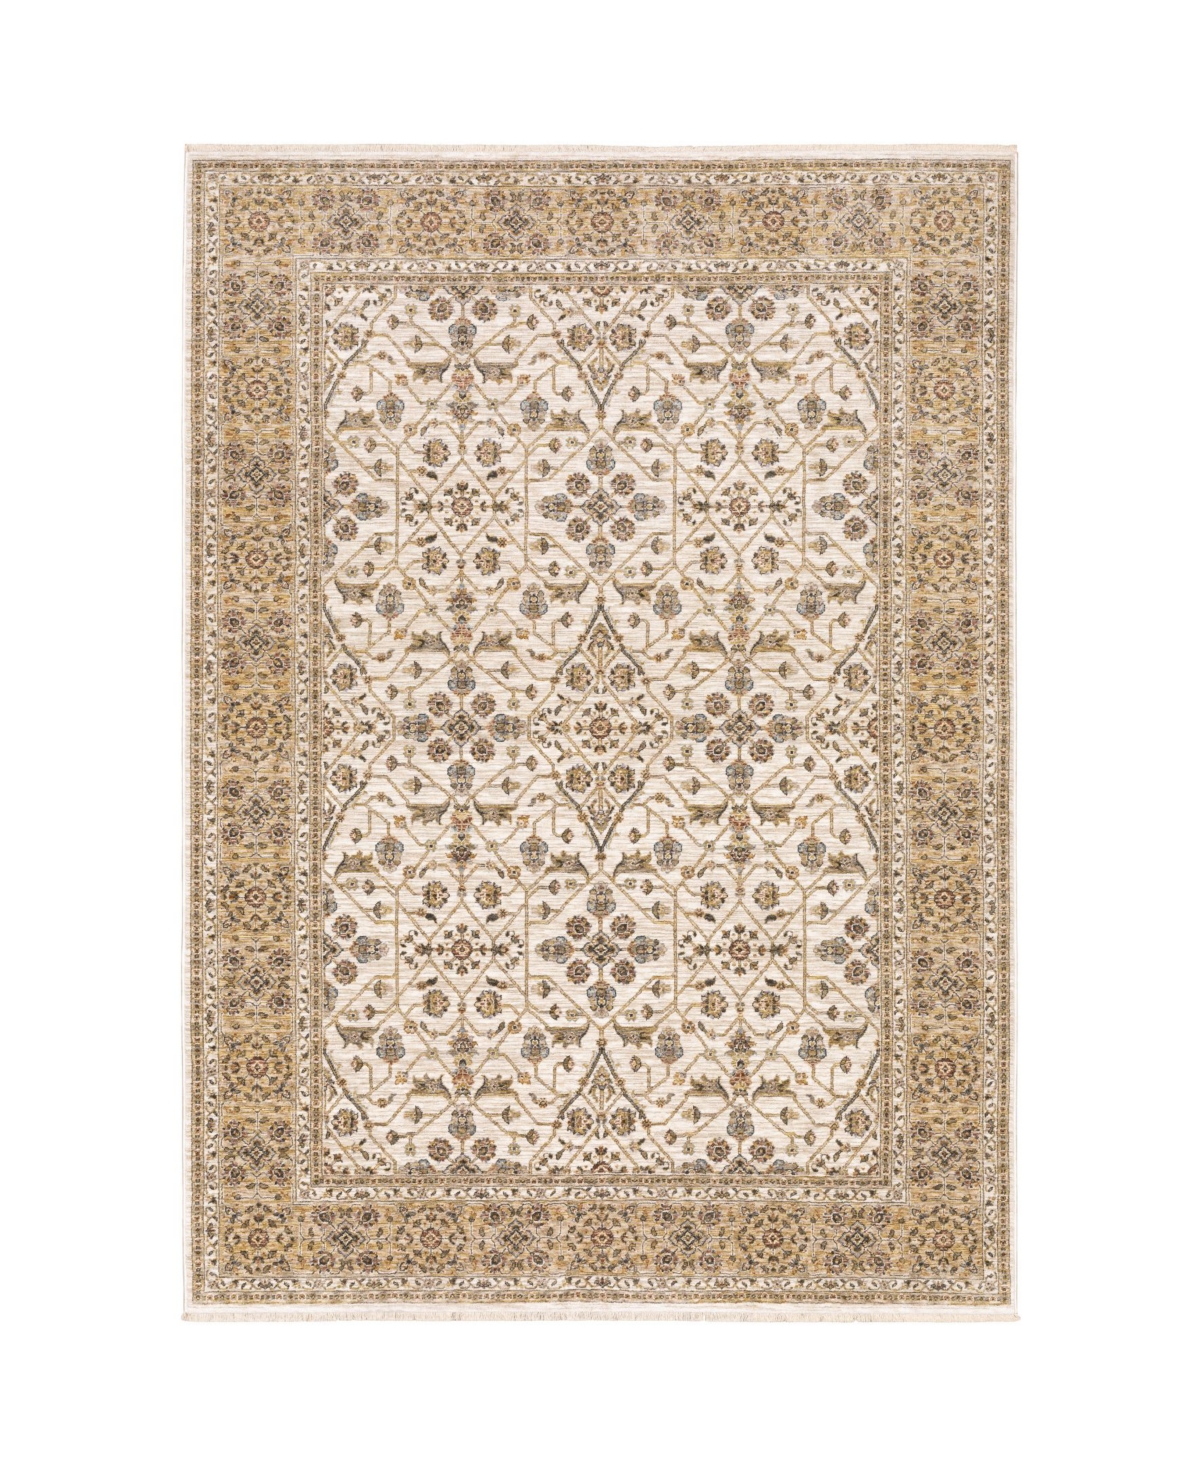 Jhb Design S Kumar Kum01 Ivory And Gold 2' X 3' Area Rug In Ivory,gold